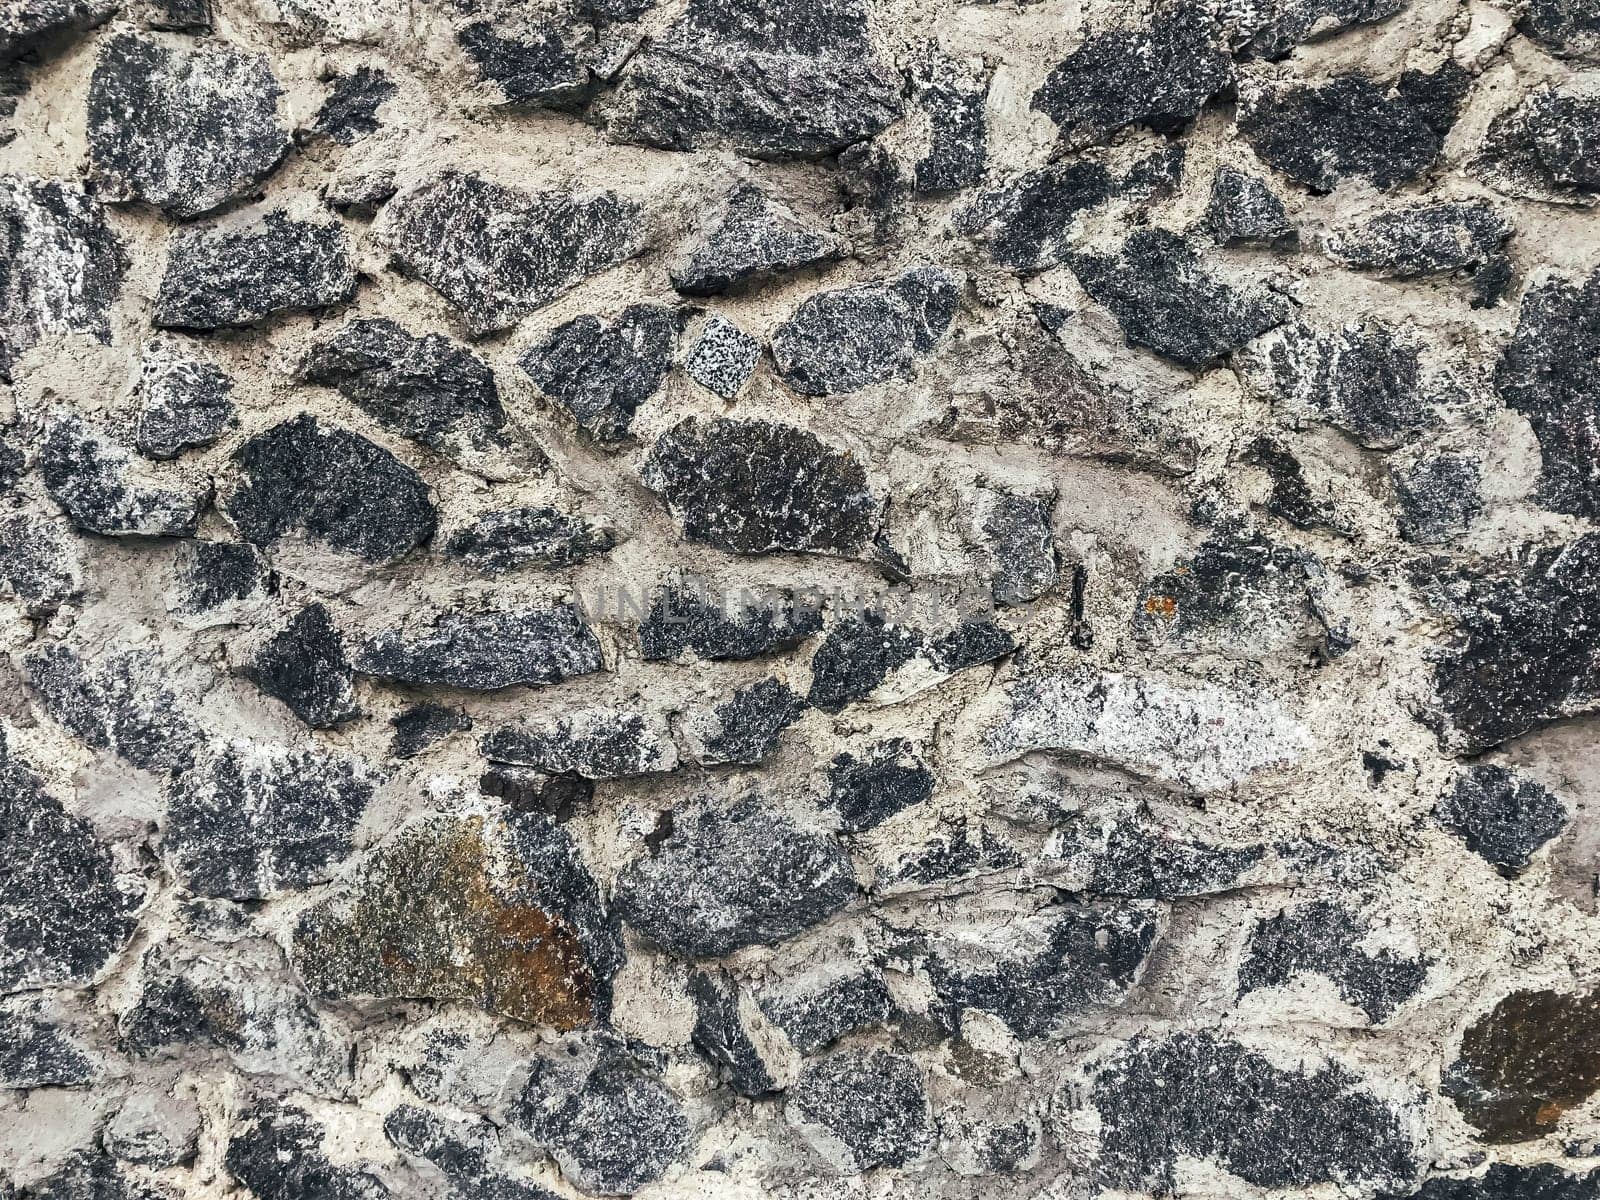 A wall made of stone with a lot of black and white stones. The wall is rough and has a lot of texture